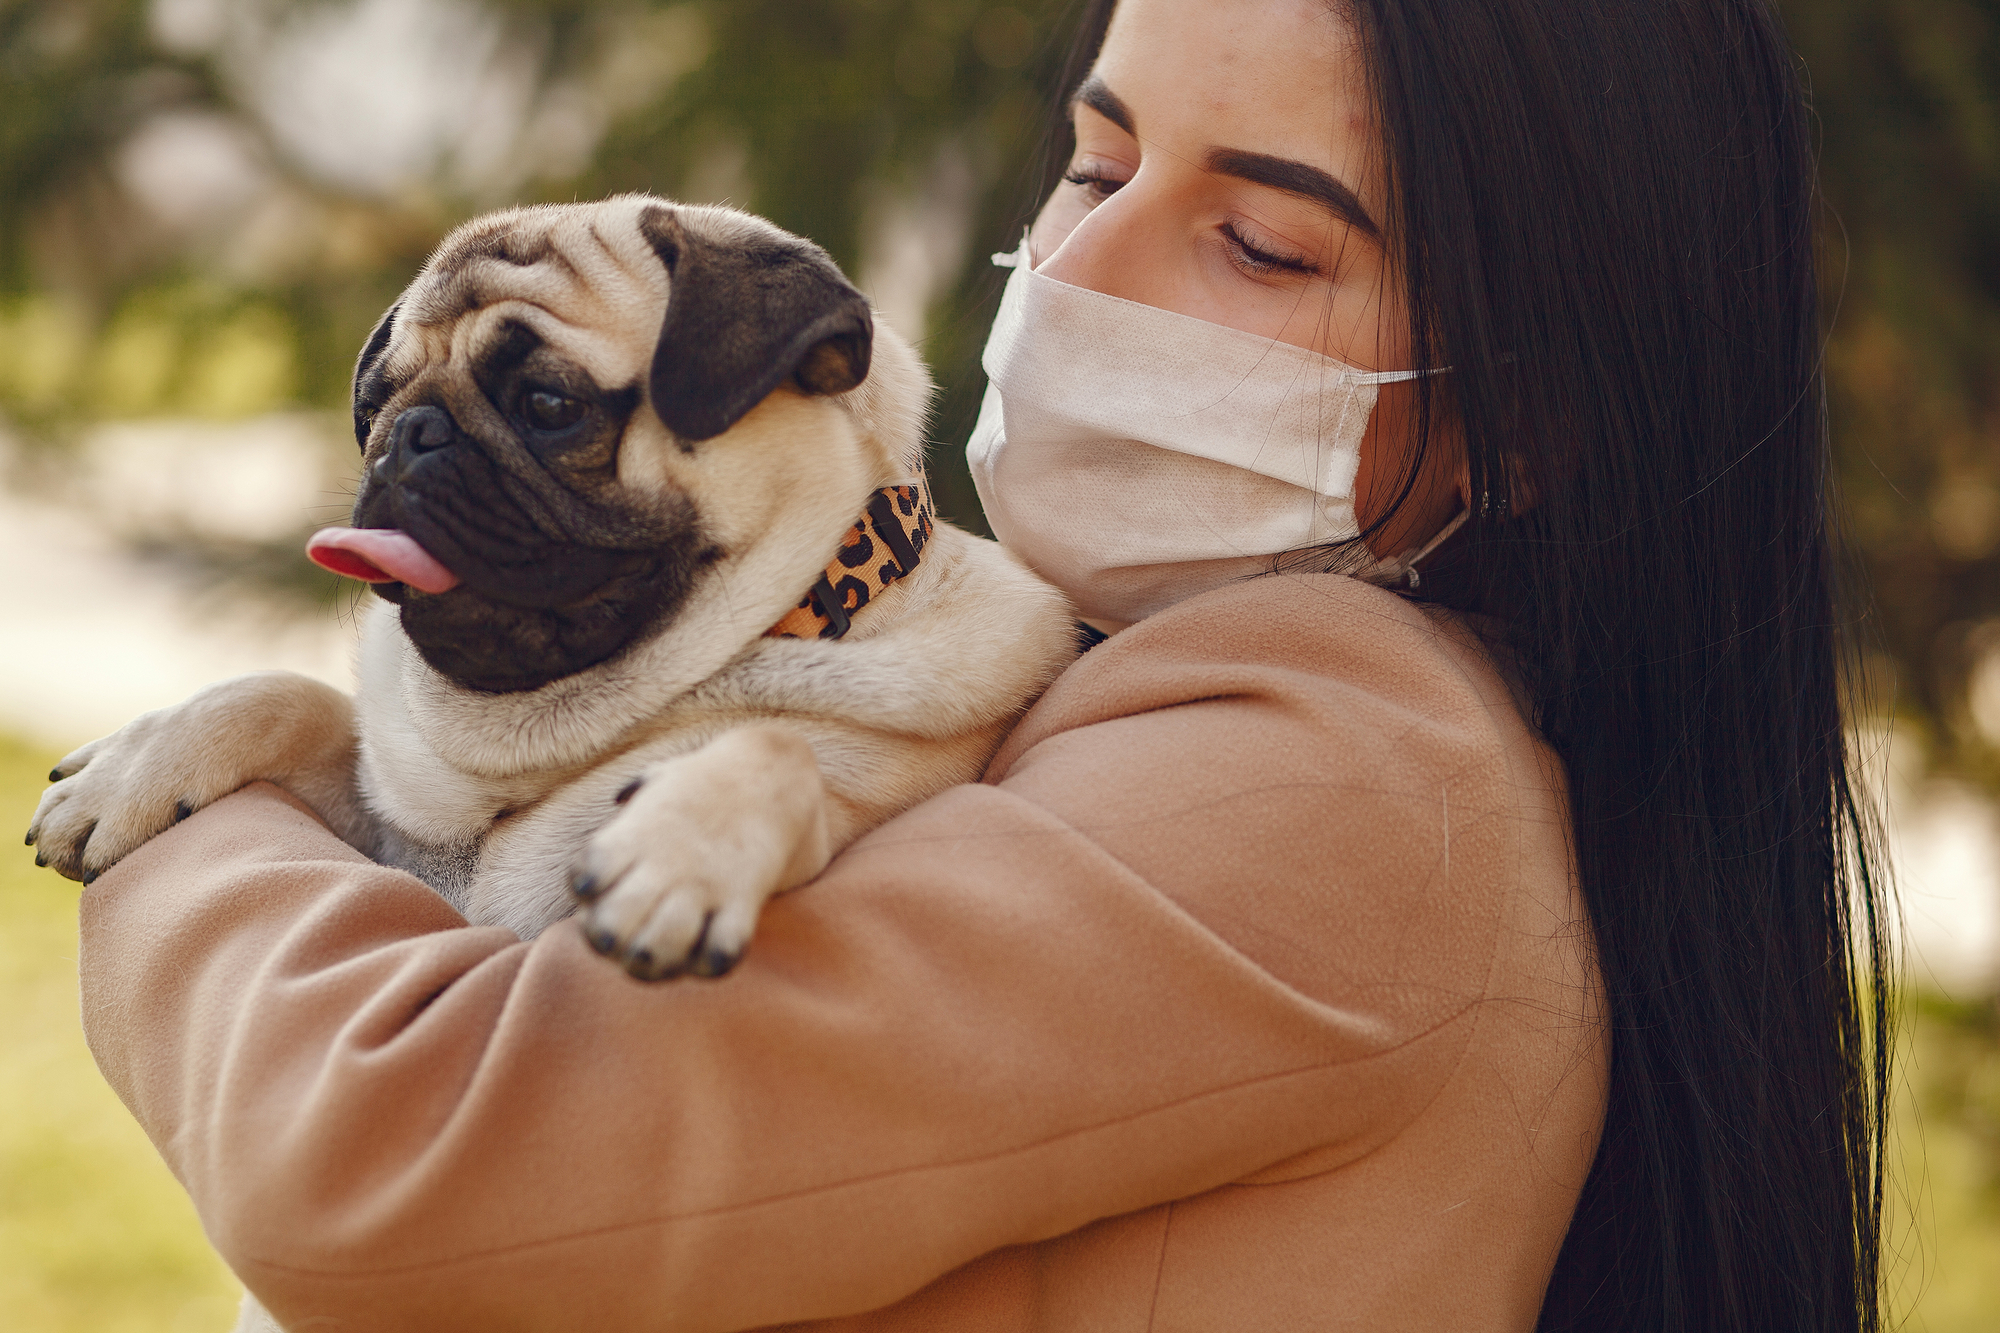 Brunette in a mask walks with pug